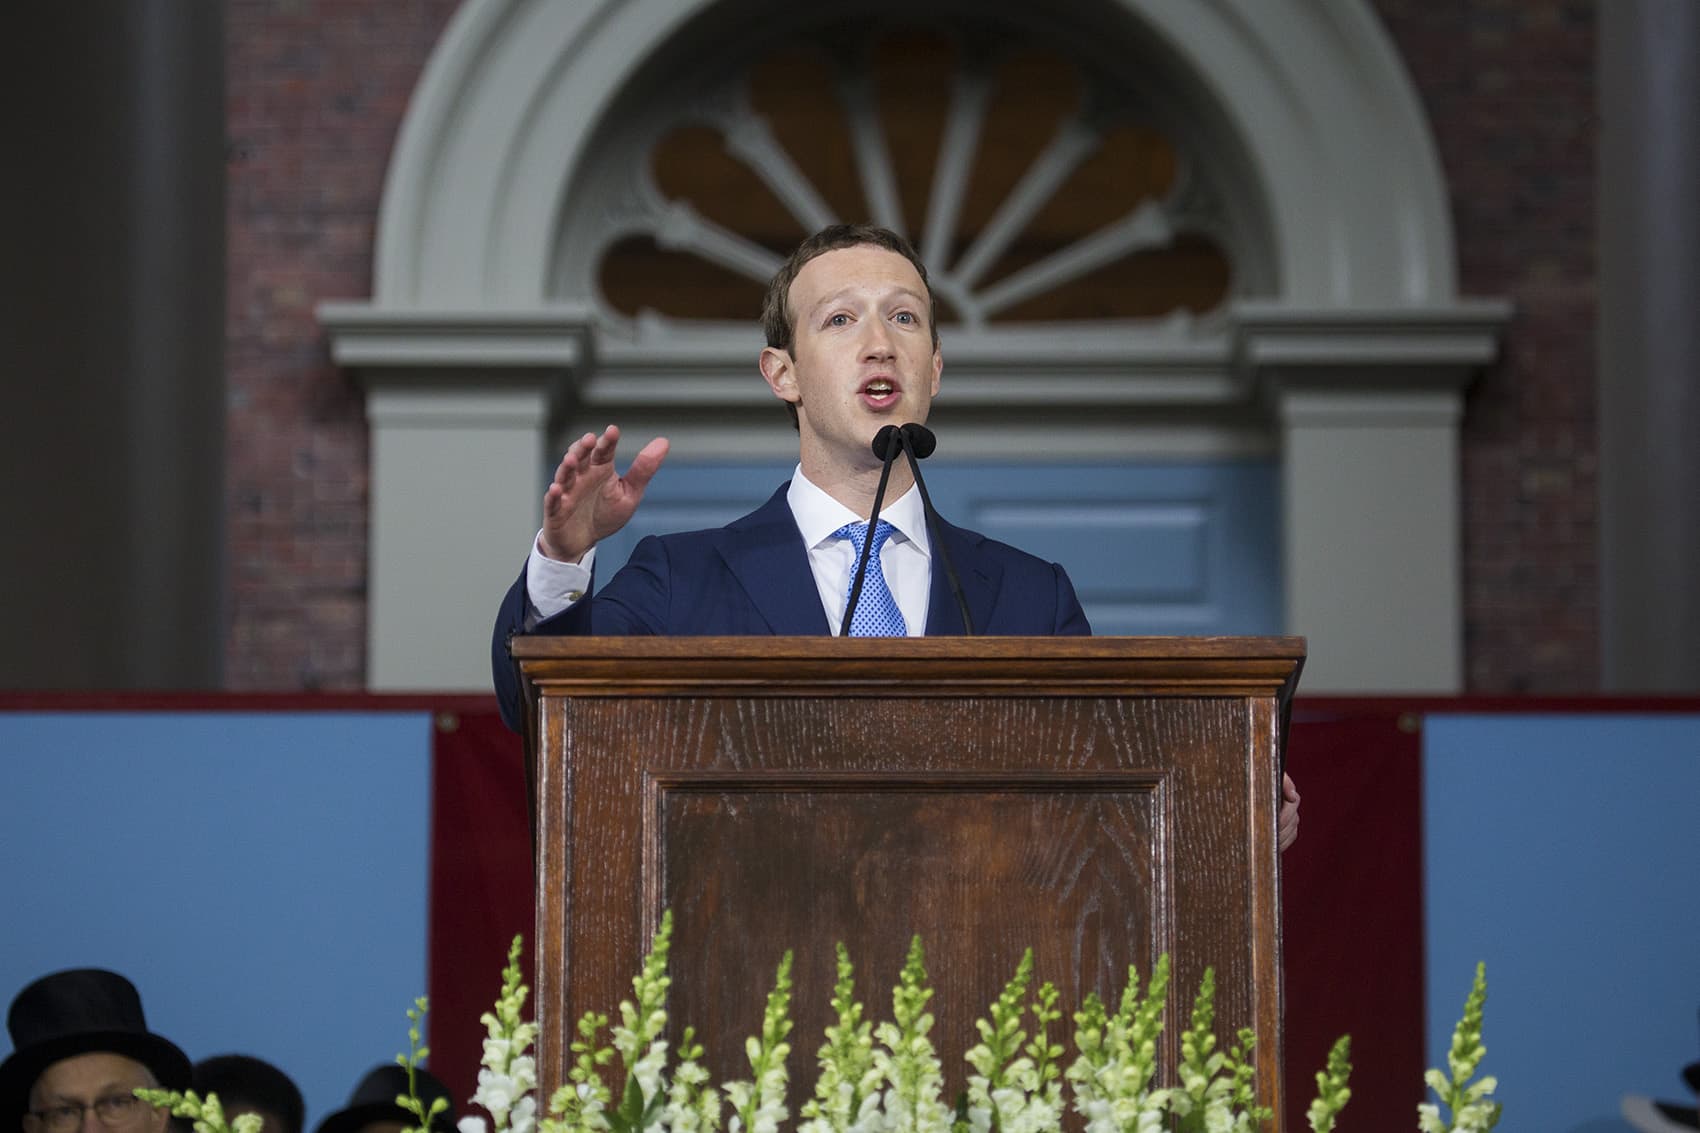 Facebook CEO Mark Zuckerberg spoke to Harvard graduates Thursday on what he's experienced on stops along his national &quot;listening tour.&quot; (Jesse Costa/WBUR)